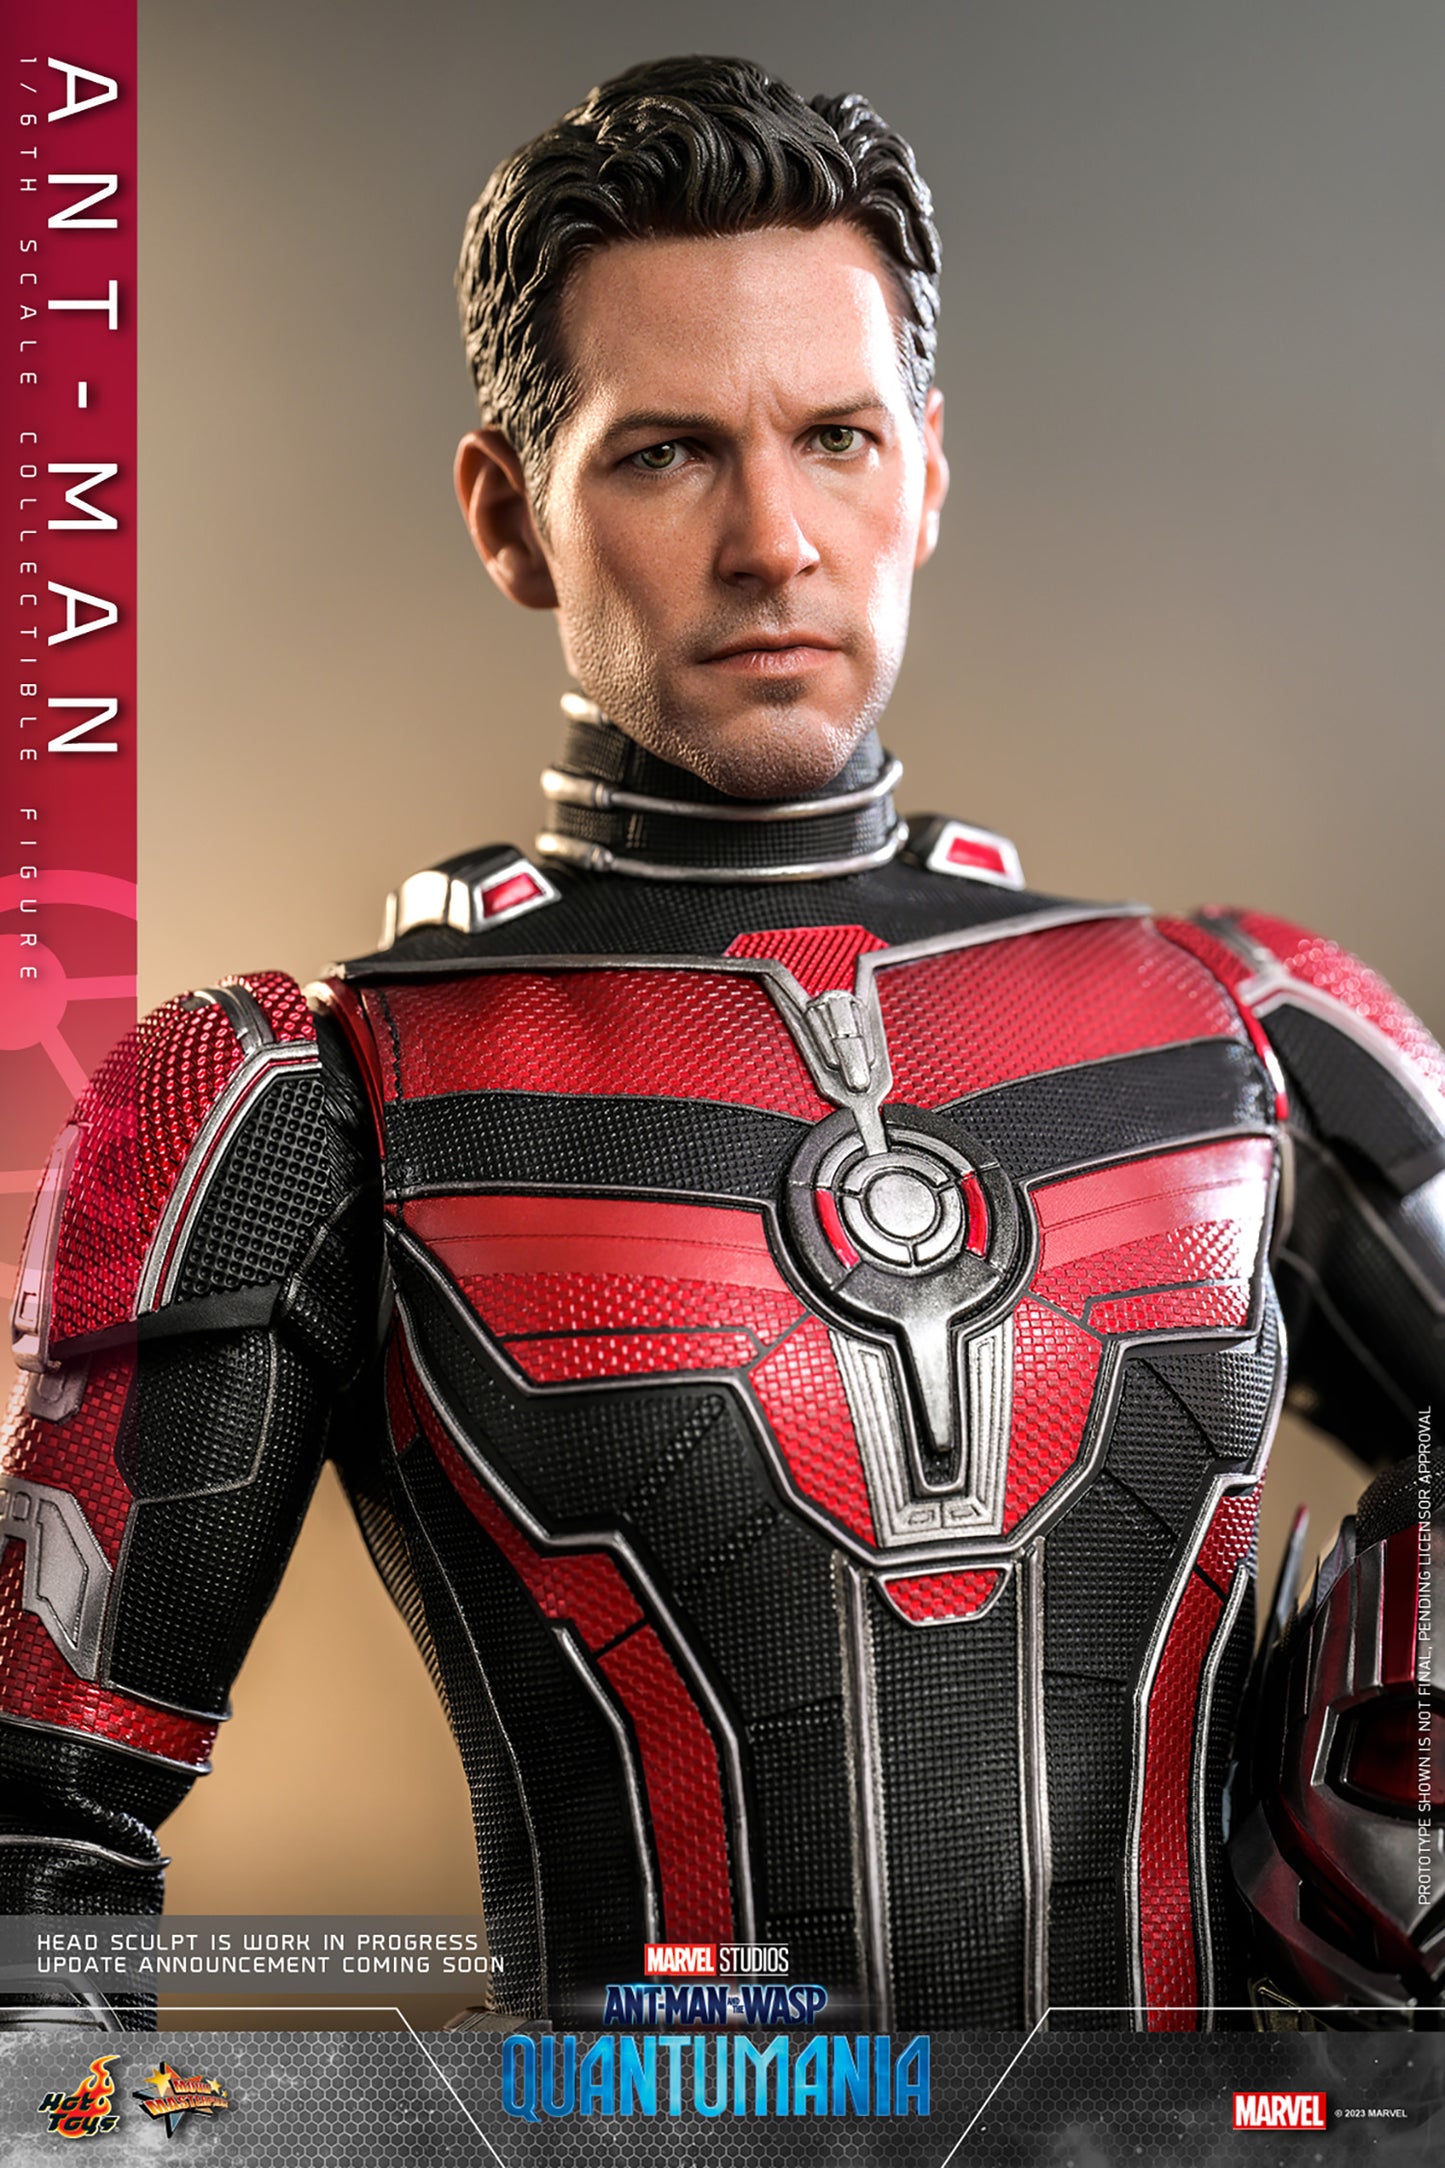 Ant-Man - Ant-Man and the Wasp - Hot Toys 1/6 Scale Figure